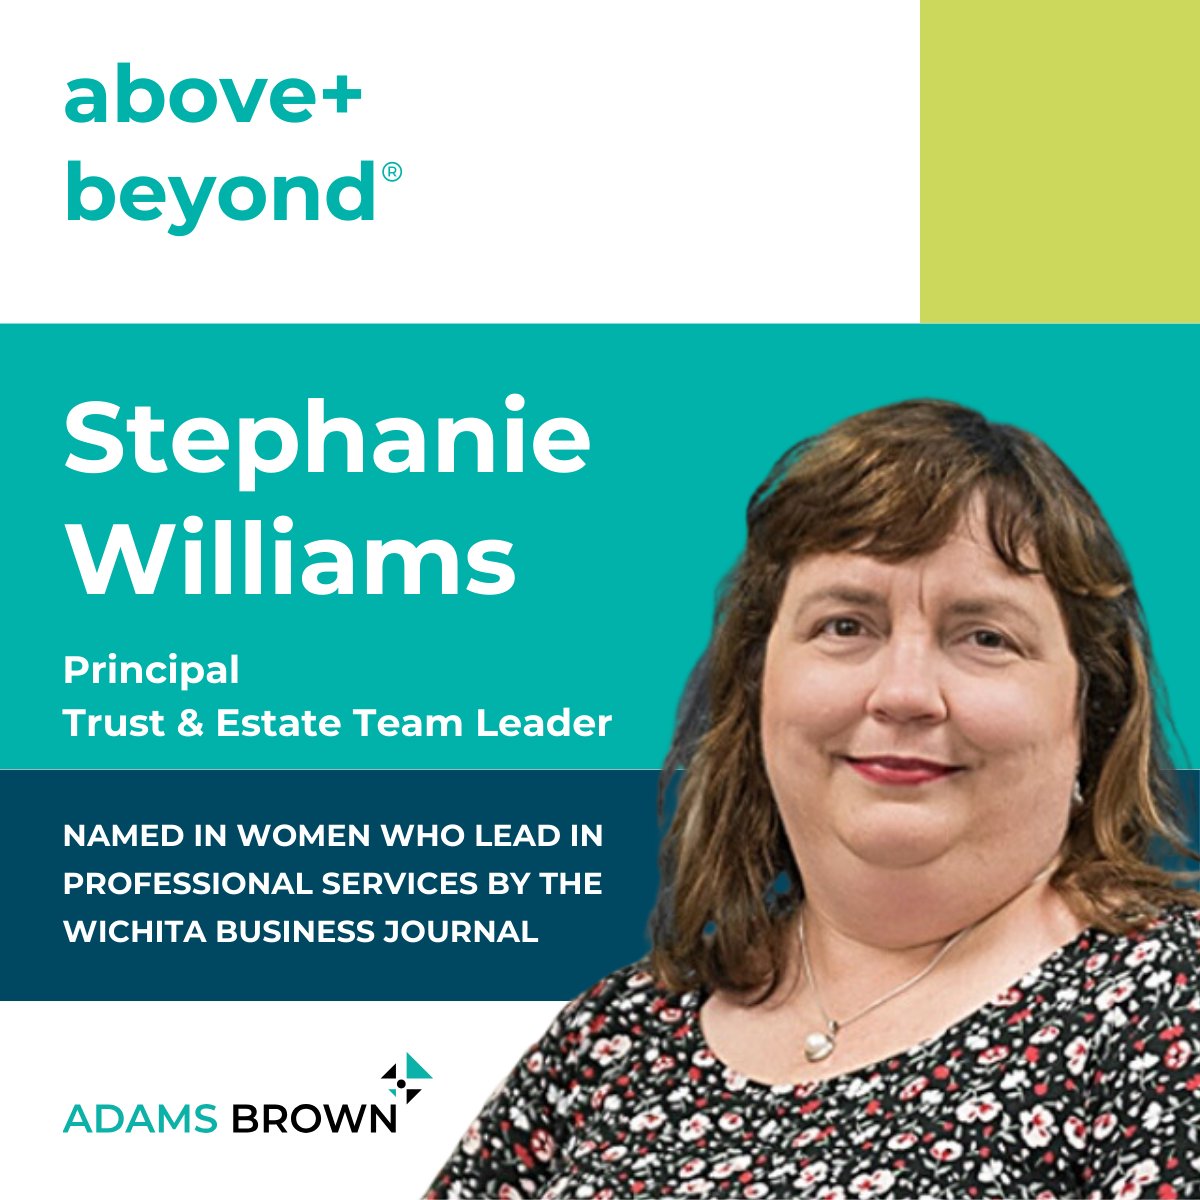 The @ICTBizJournal recently published their list of Women Who Lead in Professional Services, including our own Stephanie Williams! Read the full article here: hubs.la/Q02vBnjp0 #ICTBizJournal #WomenWhoLead #aboveandbeyond #WorkWithAdamsBrown #leadership